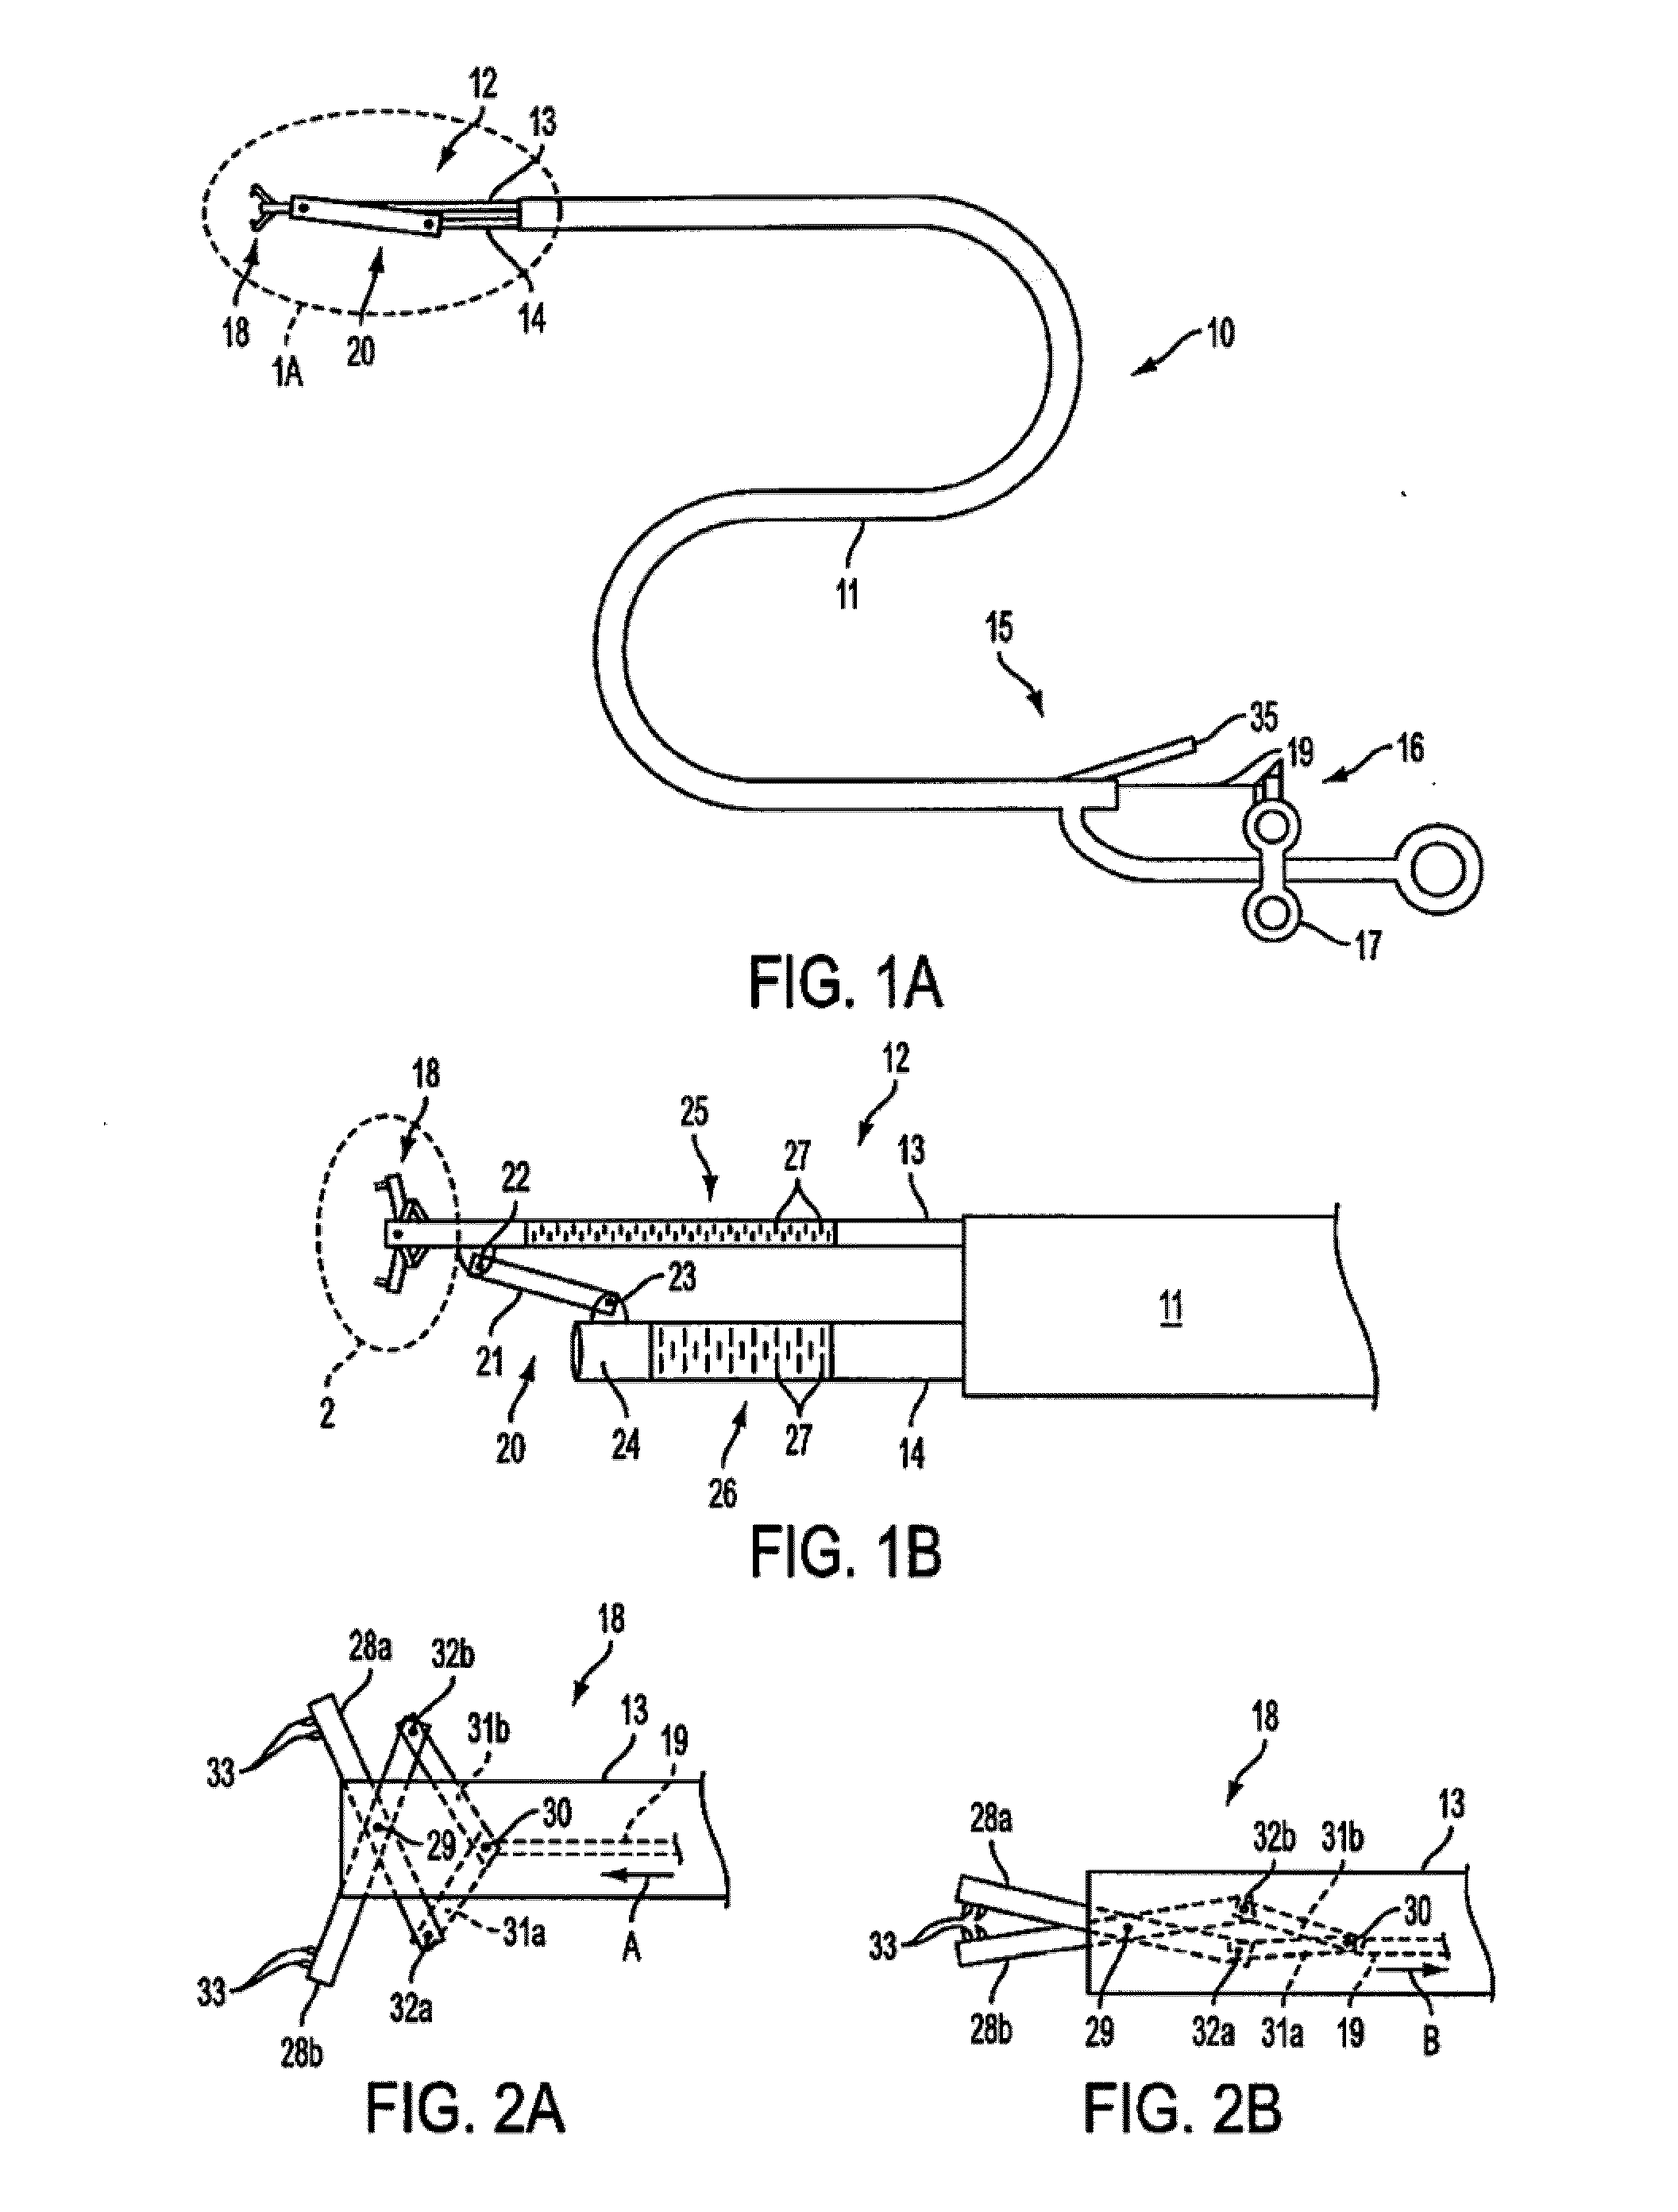 Apparatus and methods for forming gastrointestinal tissue approximations